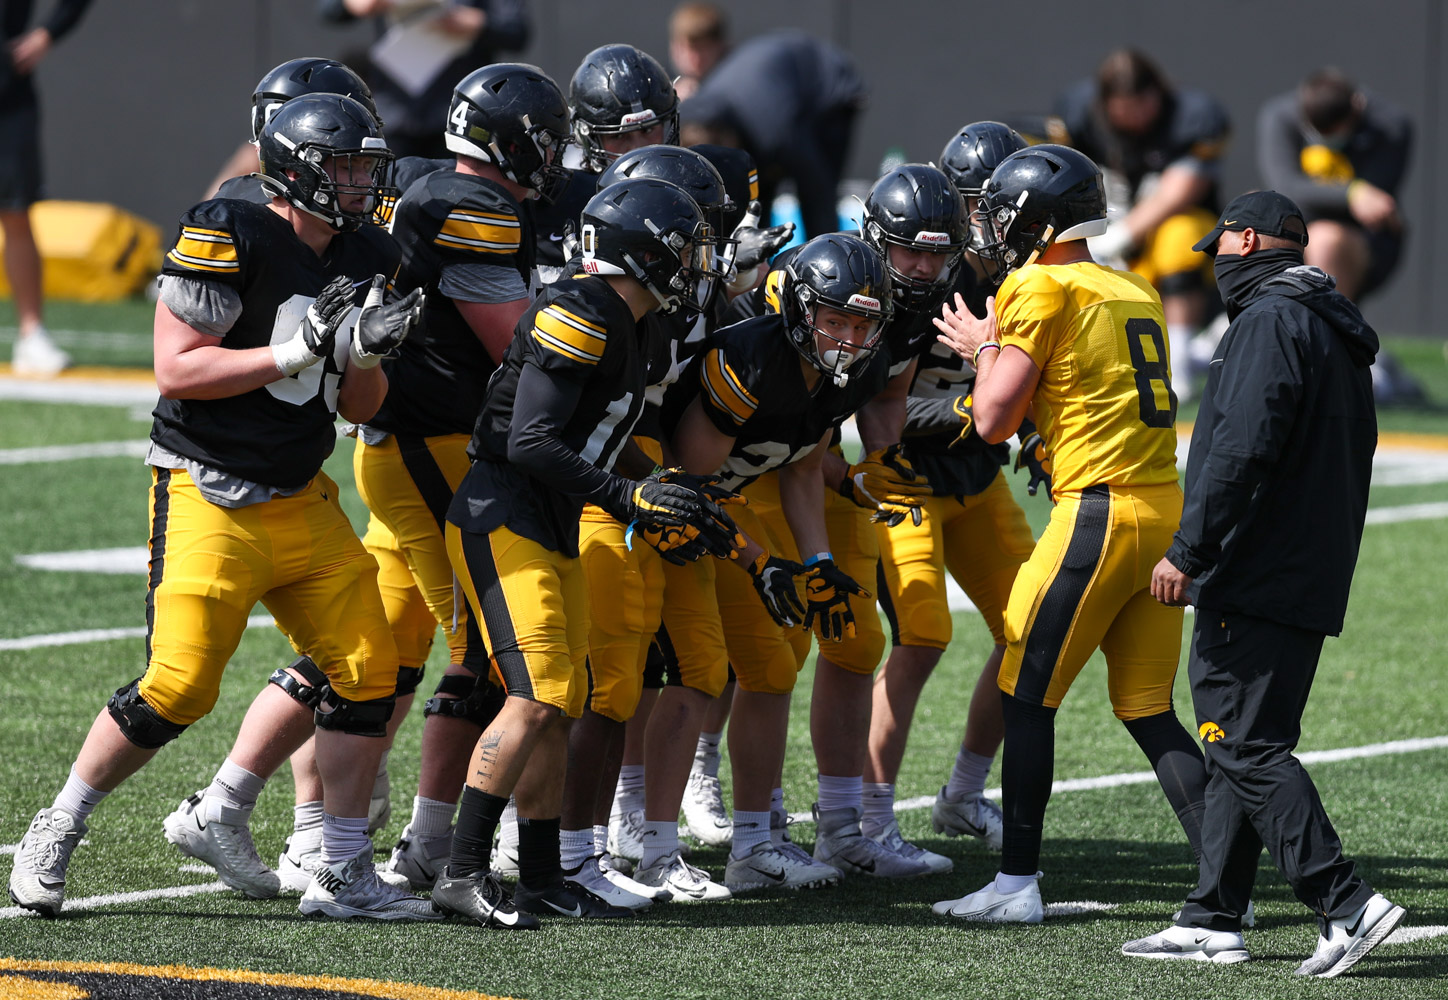 Opinion Observations from the Iowa football team's open spring